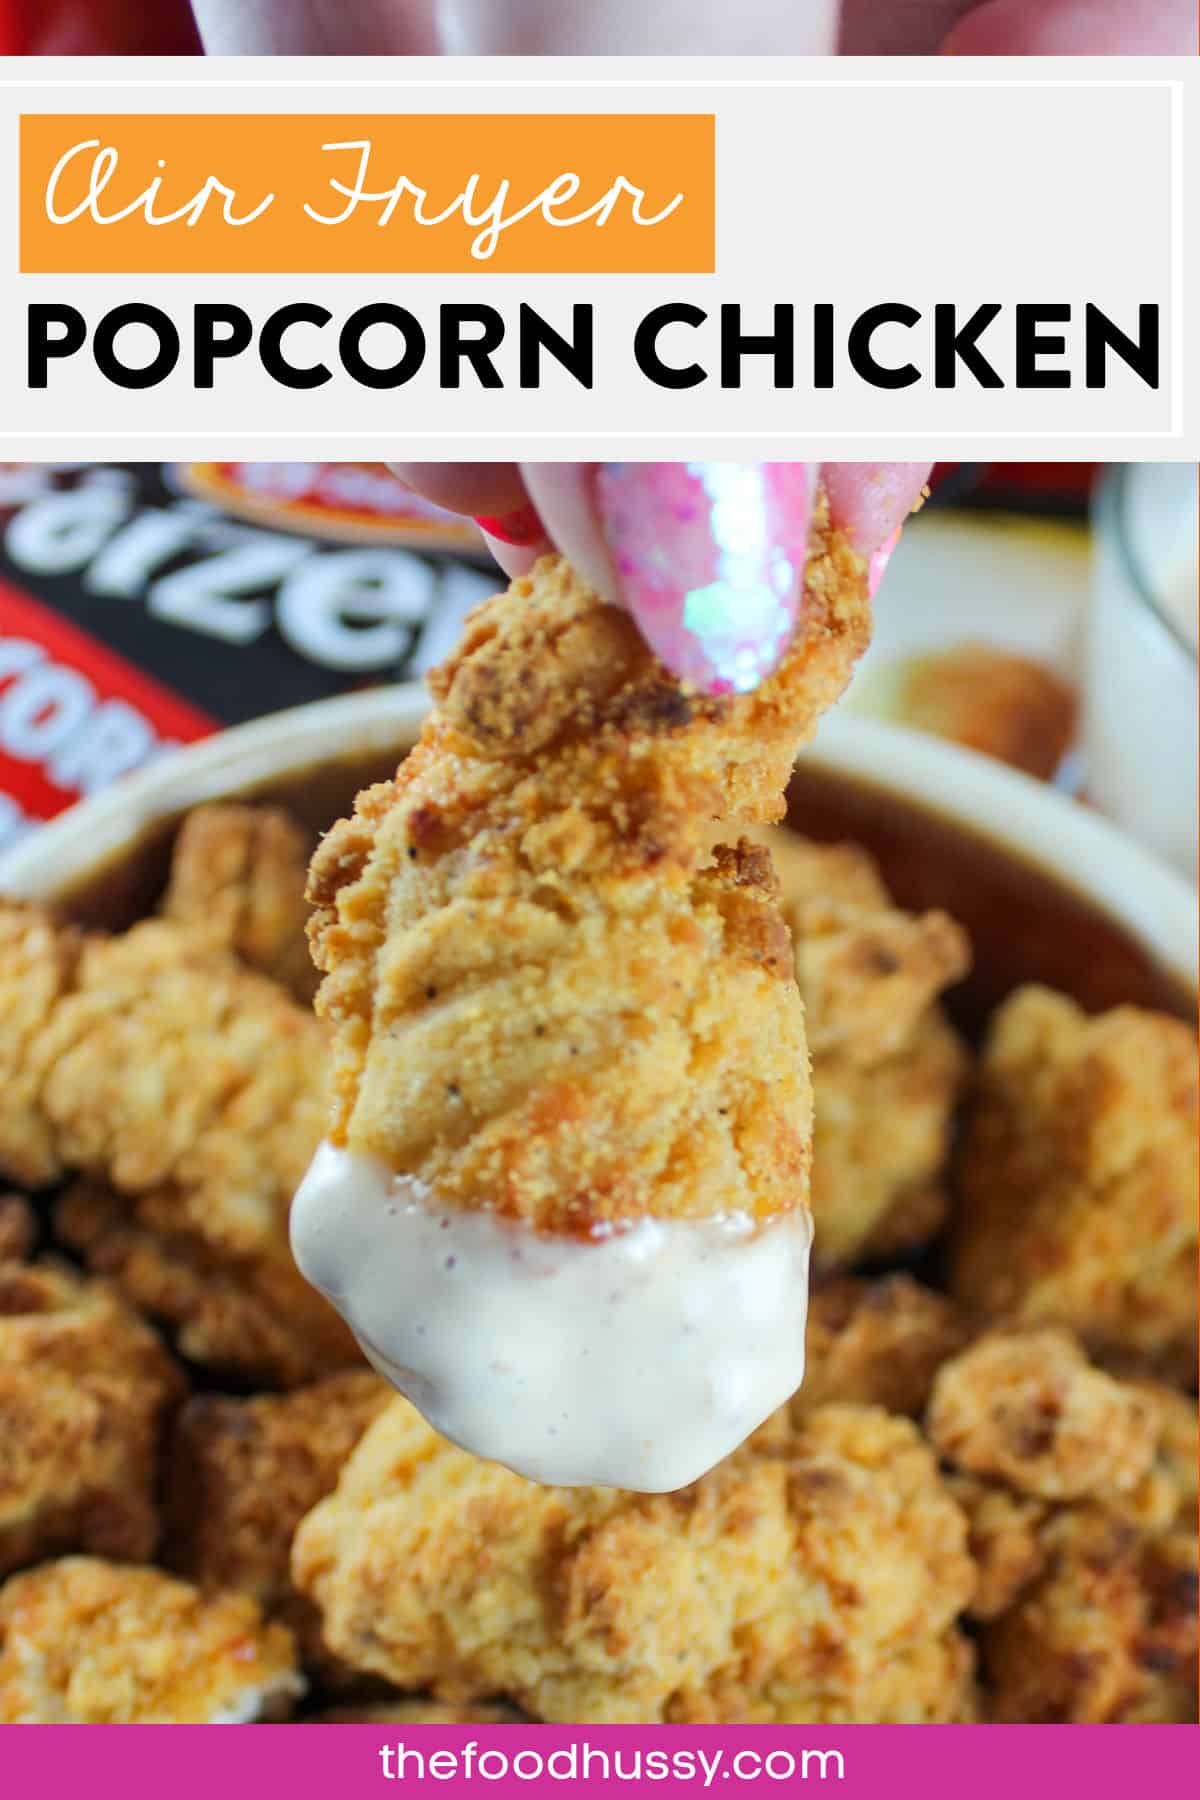 Tyson Popcorn Chicken in the air fryer is one of my favorite quick go-to meals and the air fryer makes it even quicker and easier! Pop it in - shake halfway through and you're done! Plus I made a quick dipping sauce for an extra creamy zip!  via @foodhussy